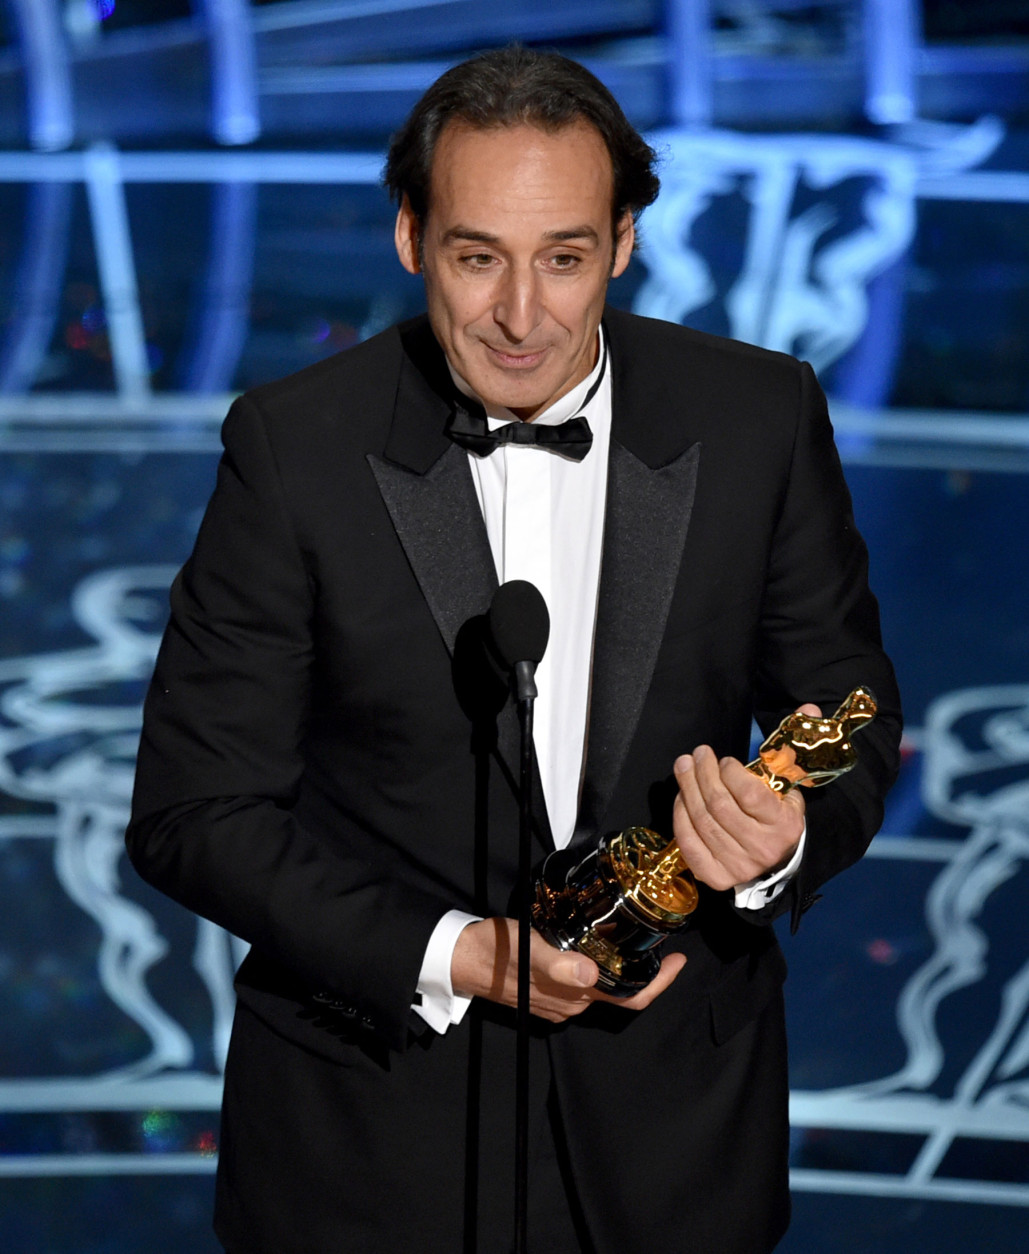 Alexandre Desplat accepts the award for original score in a feature film for “The Grand Budapest Hotel” at the Oscars on Sunday, Feb. 22, 2015, at the Dolby Theatre in Los Angeles. (Photo by John Shearer/Invision/AP)